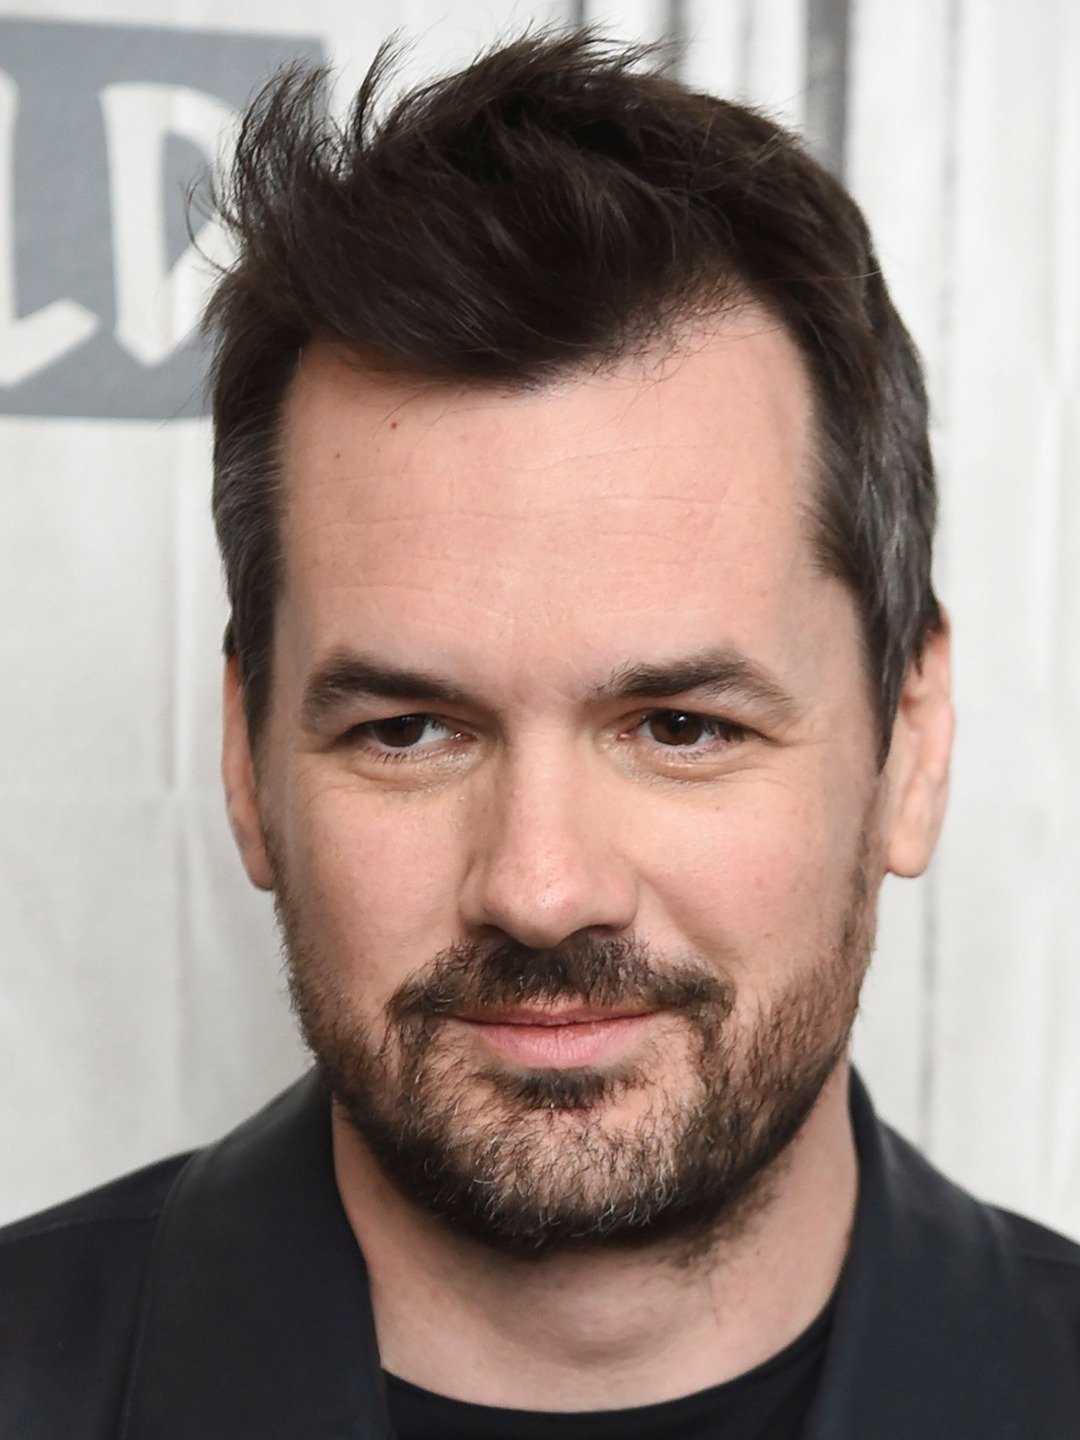 How tall is Jim Jefferies?